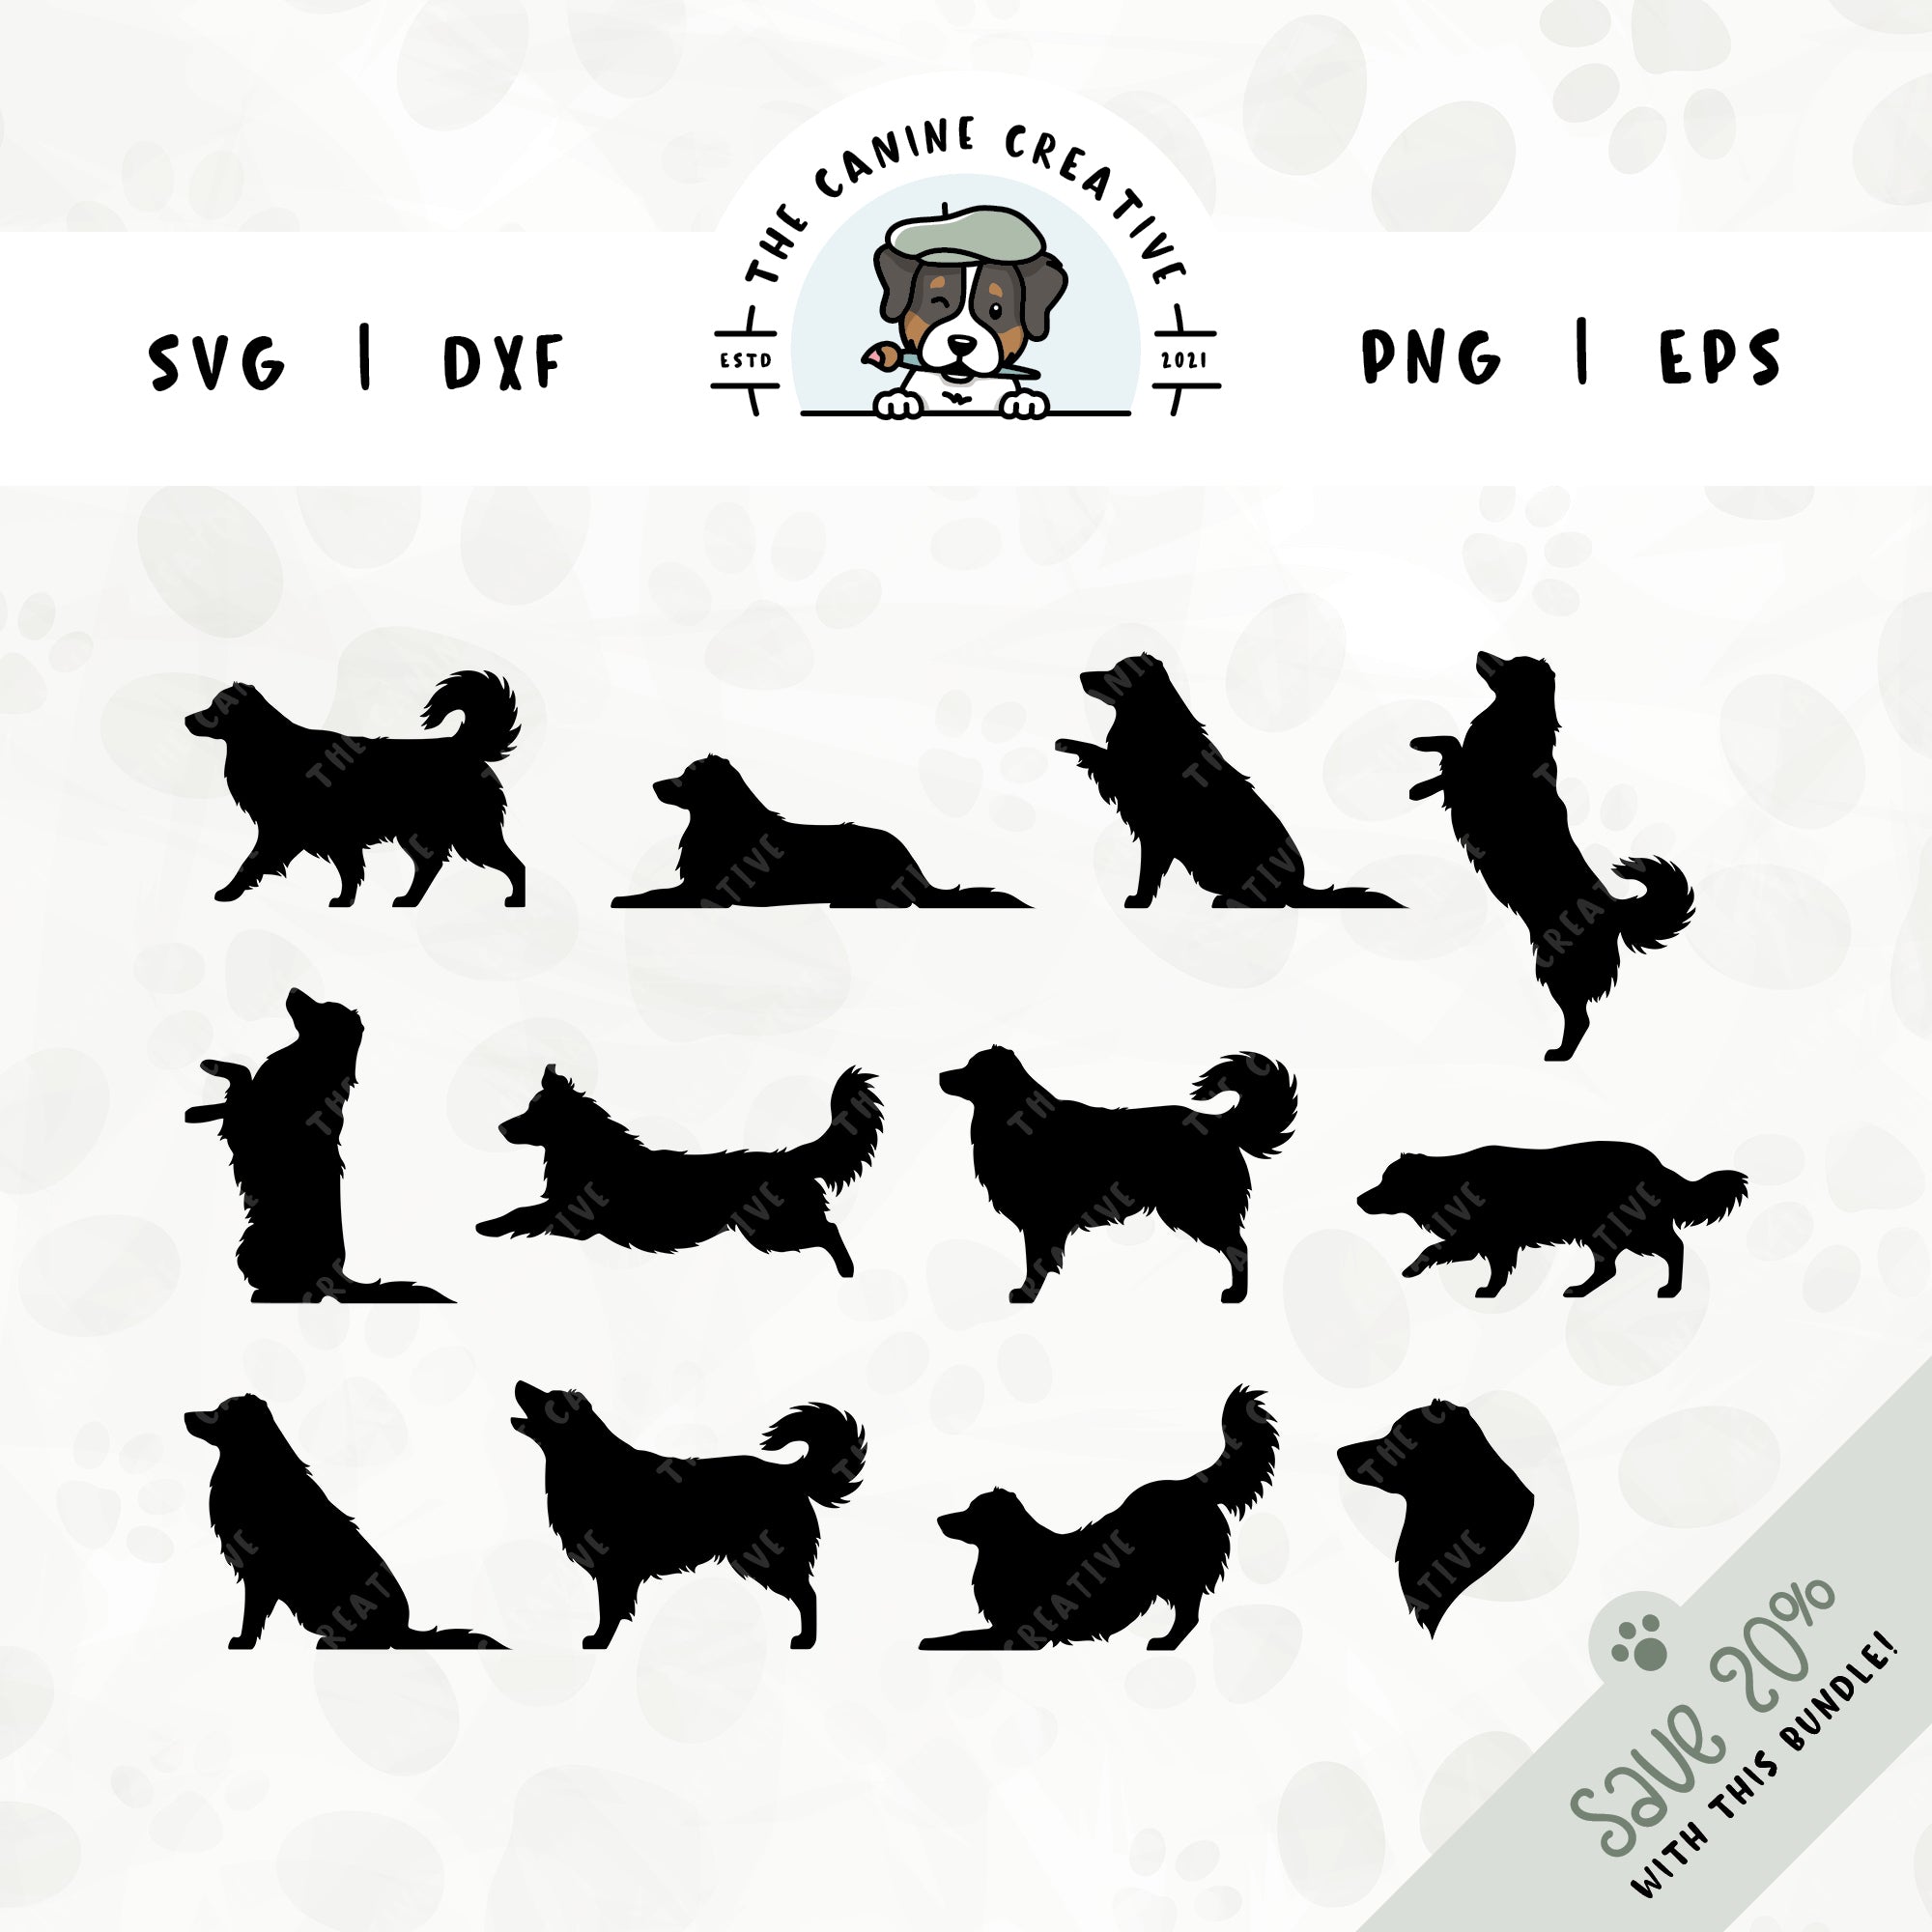 This 12-pack, long tail Australian Shepherd silhouette bundle features a dog's head in profile, along with various poses including running, laying down, playing, standing, sitting, walking, jumping up, begging, barking, herding, and shaking a paw. File formats include: SVG, DXF, PNG, and EPS.